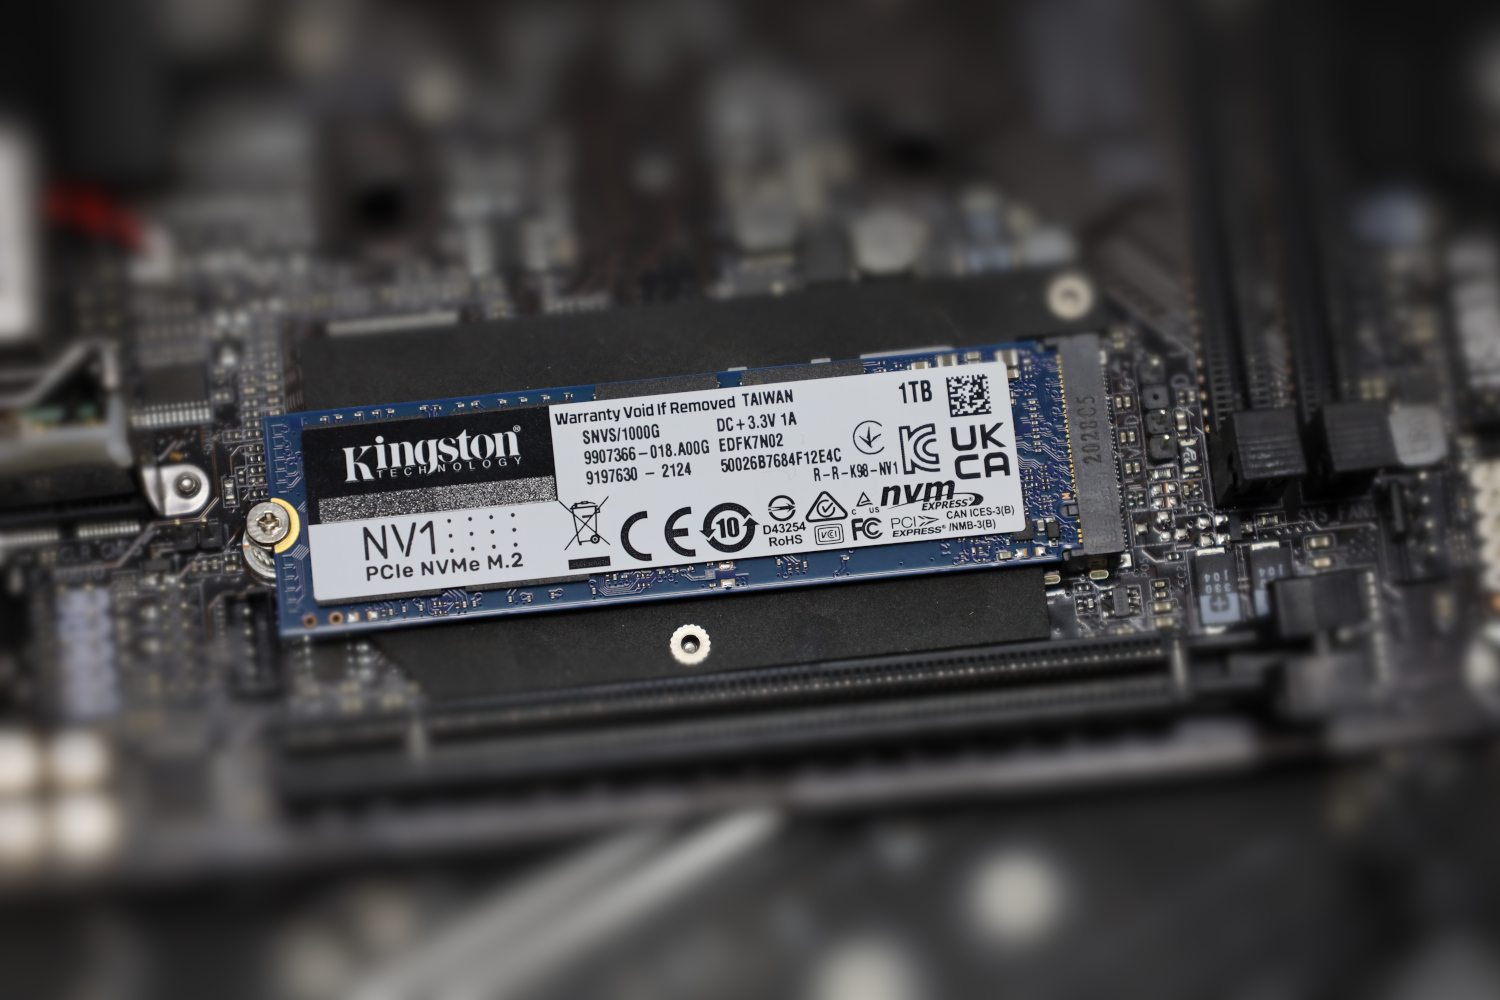 pianist gravel Requirements Kingston NV1 1TB NVMe SSD Review - ServeTheHome